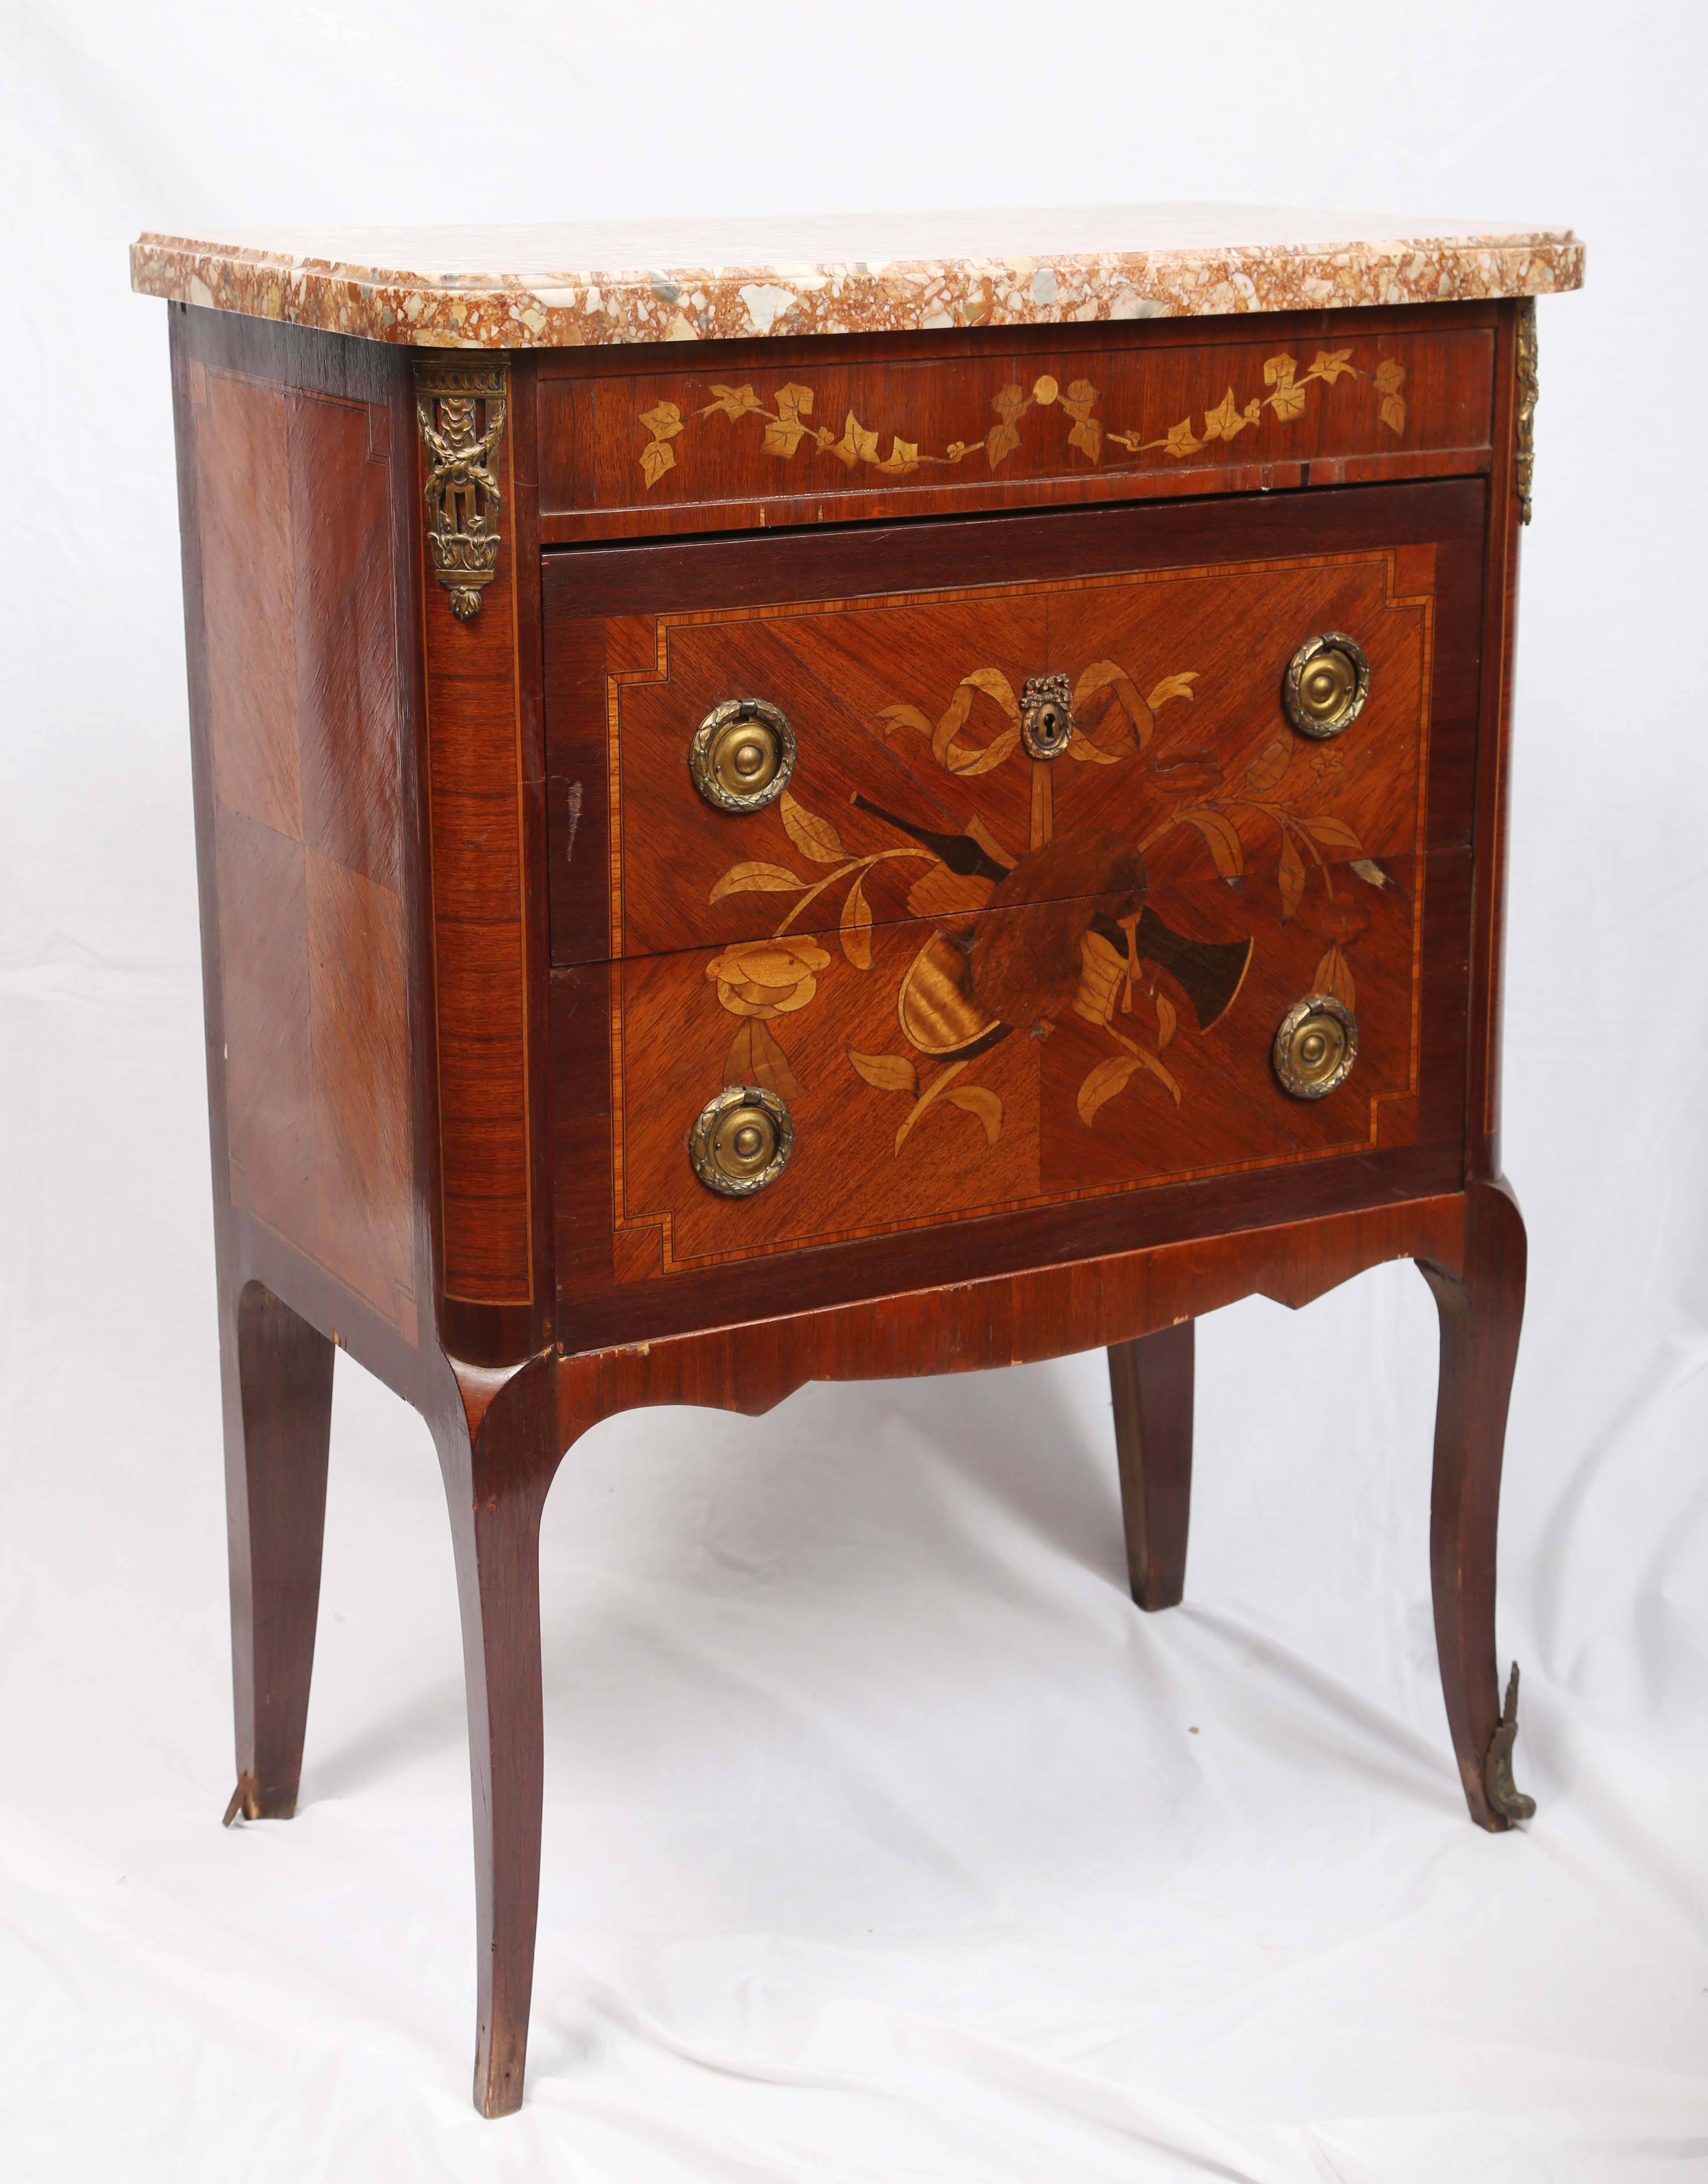 Exquisitely inlaid, with nice proportions and marble top.